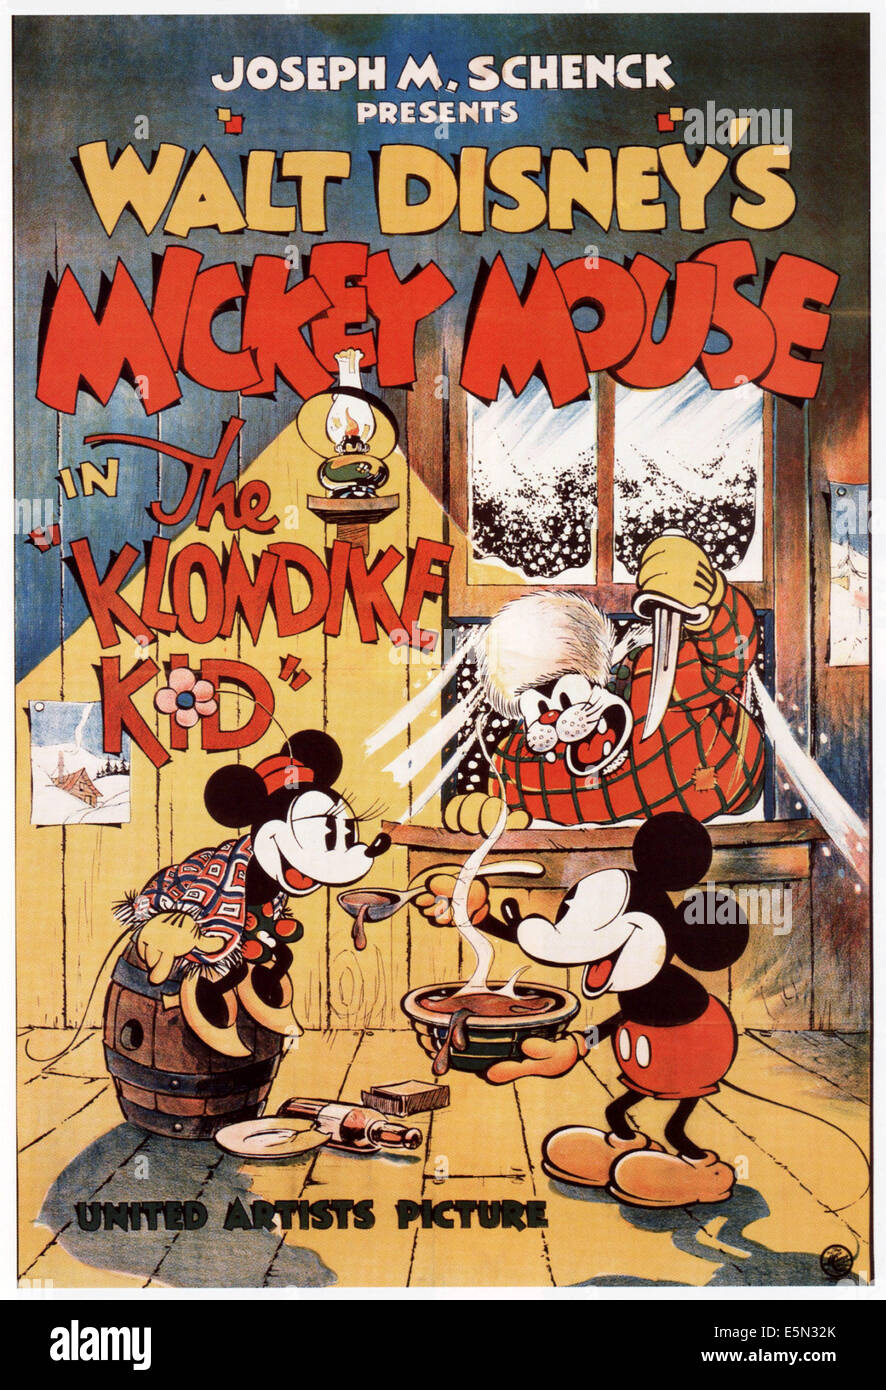 THE KLONDIKE KID, from left: Minnie Mouse, Mickey Mouse, 1932. Stock Photo